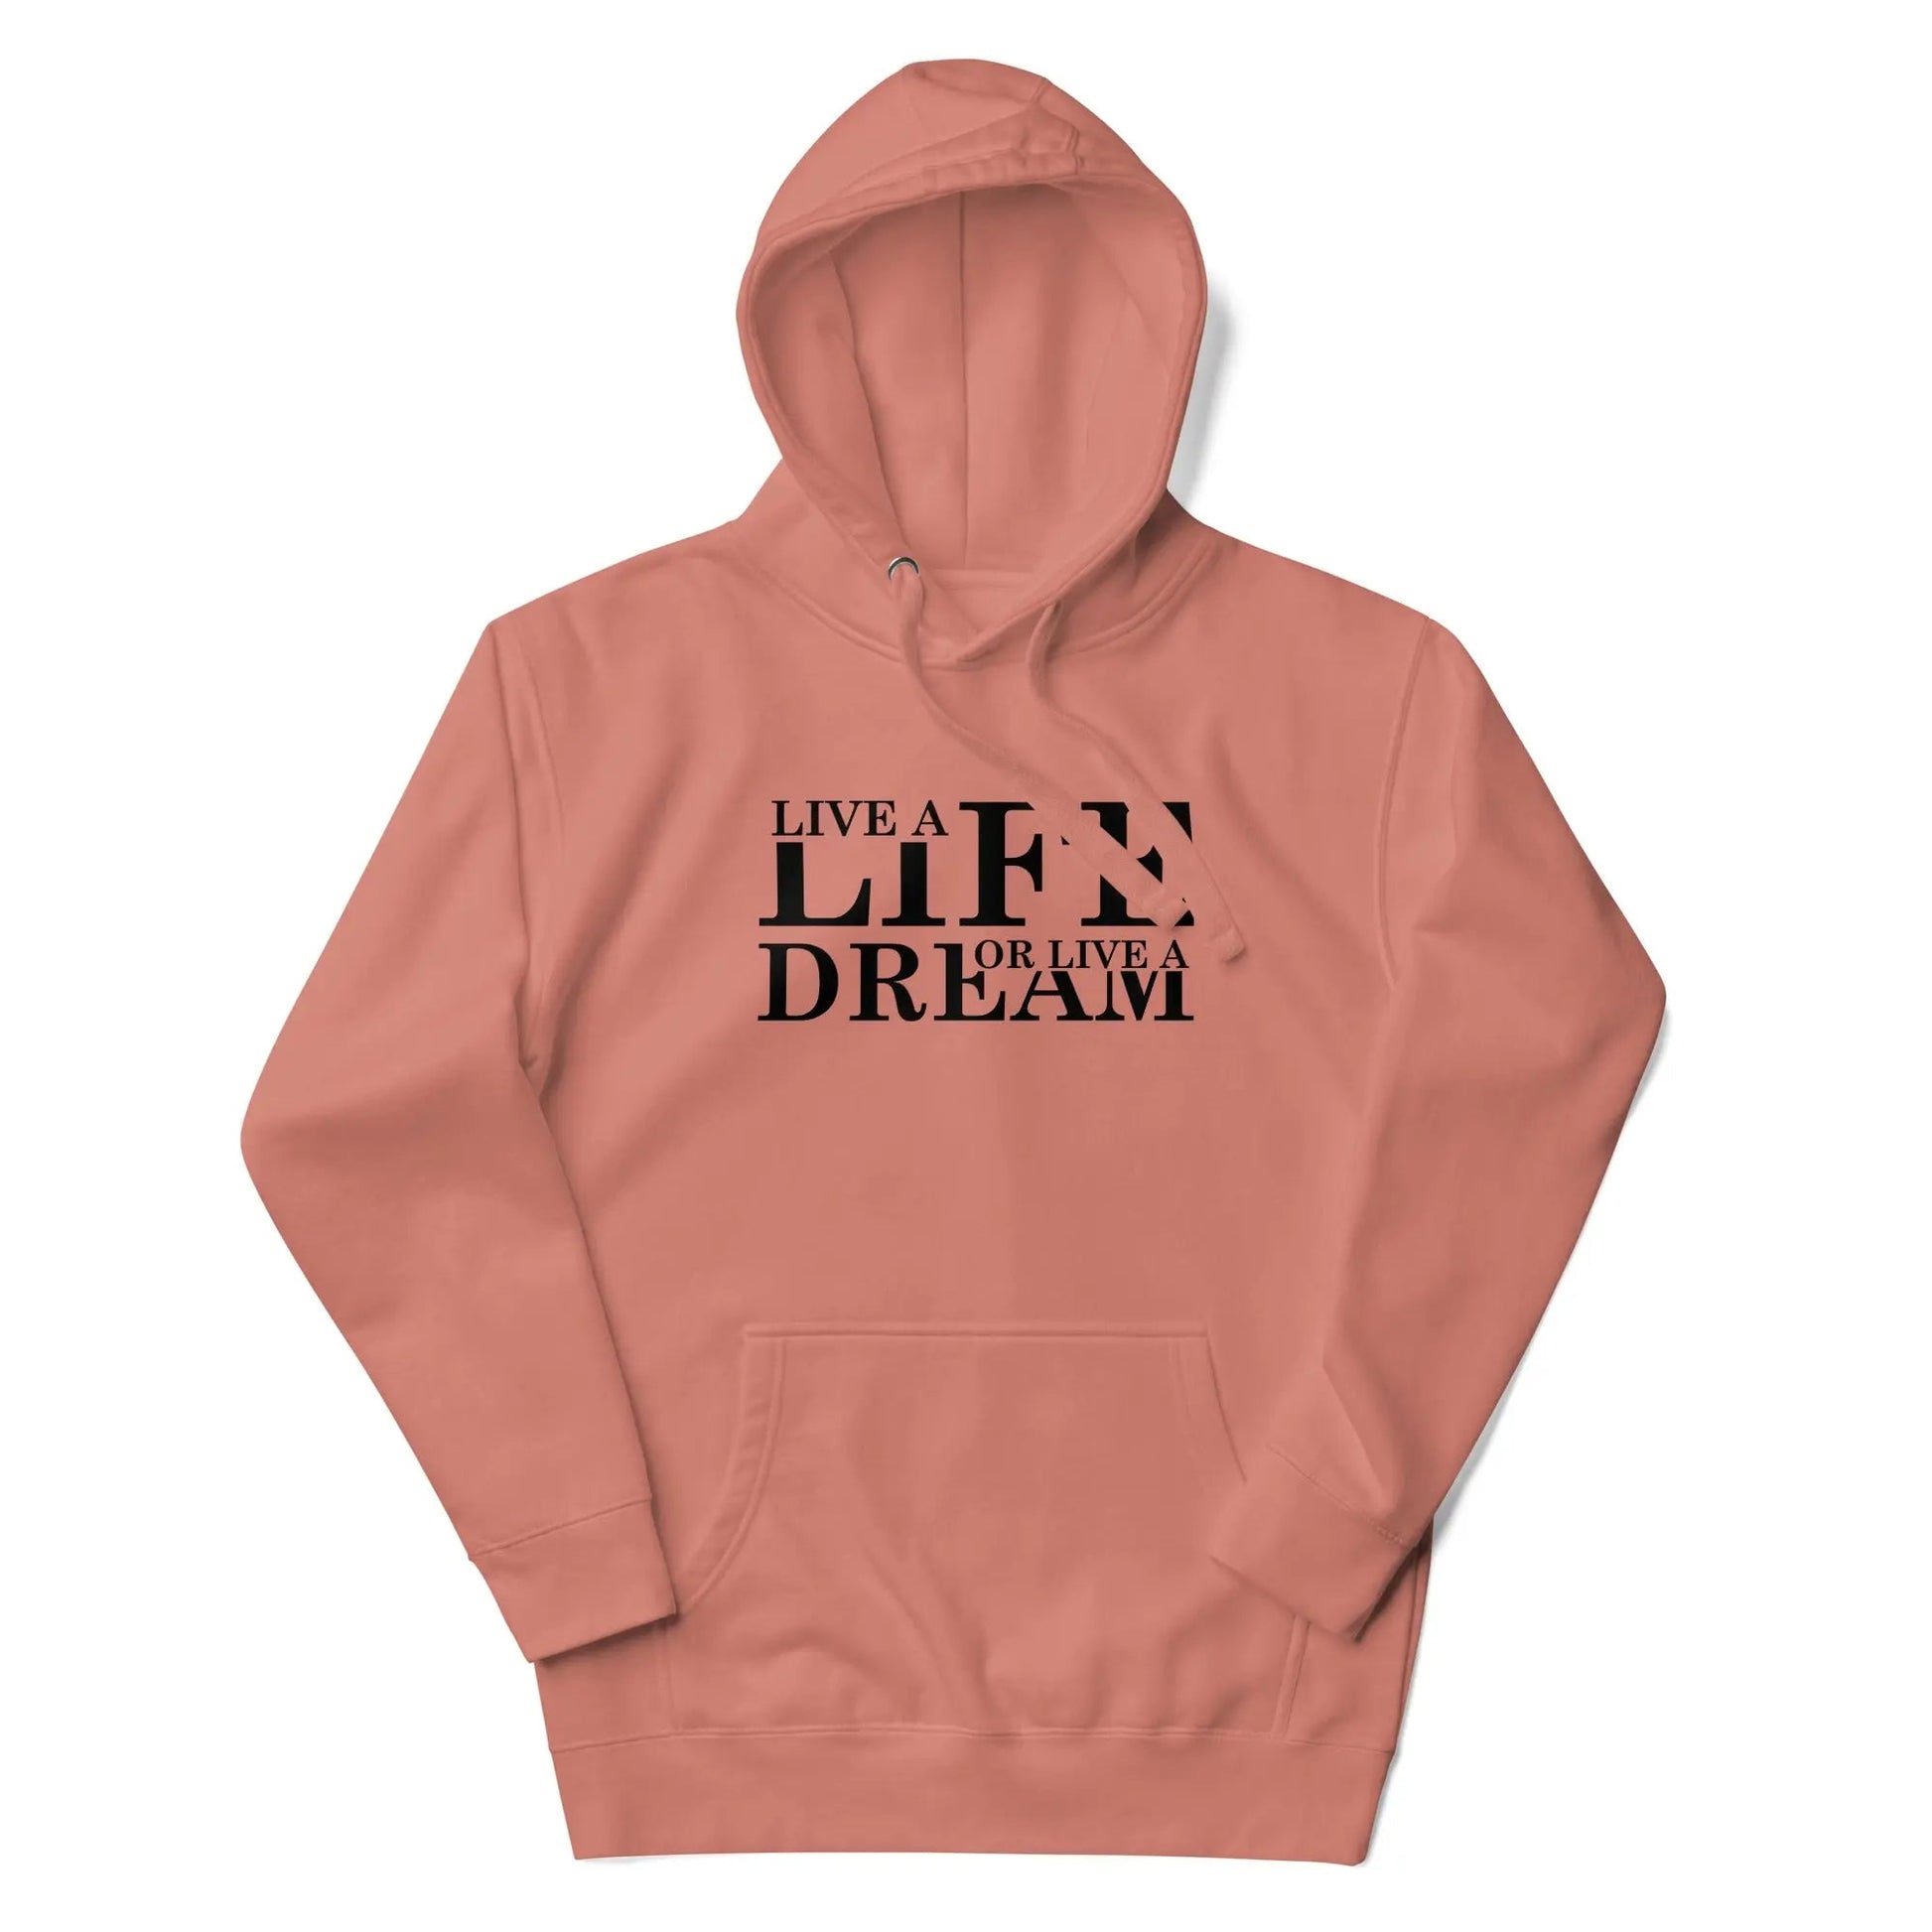 Dusty Rose / S 1 Life a Dream Unisex Hoodie by Neduz Designs